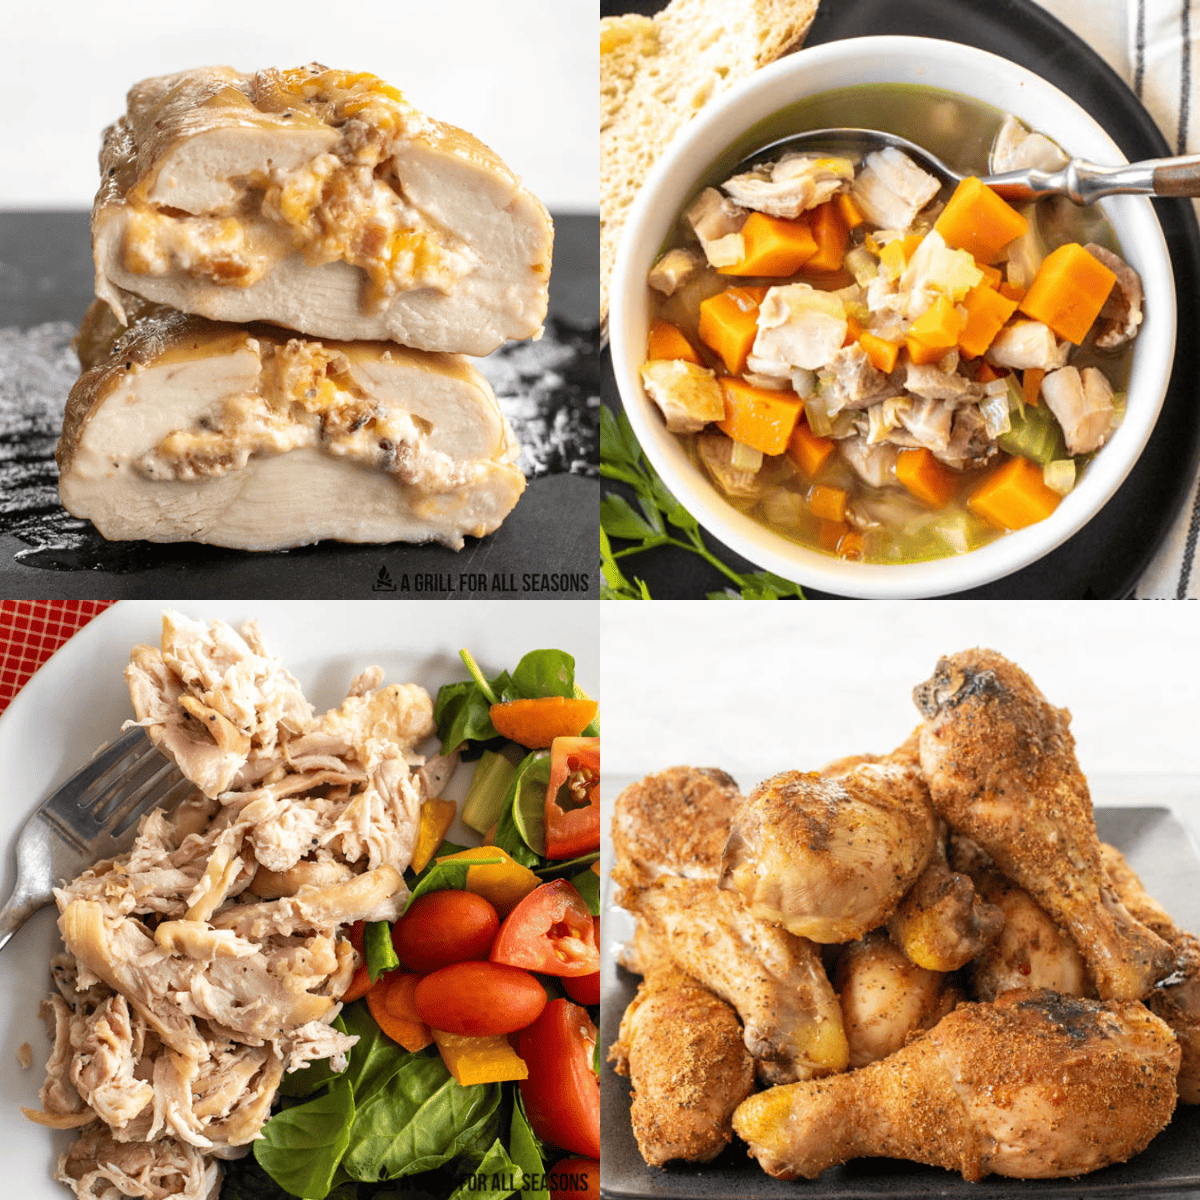 four traeger smoker chicken recipes shown in a collage image